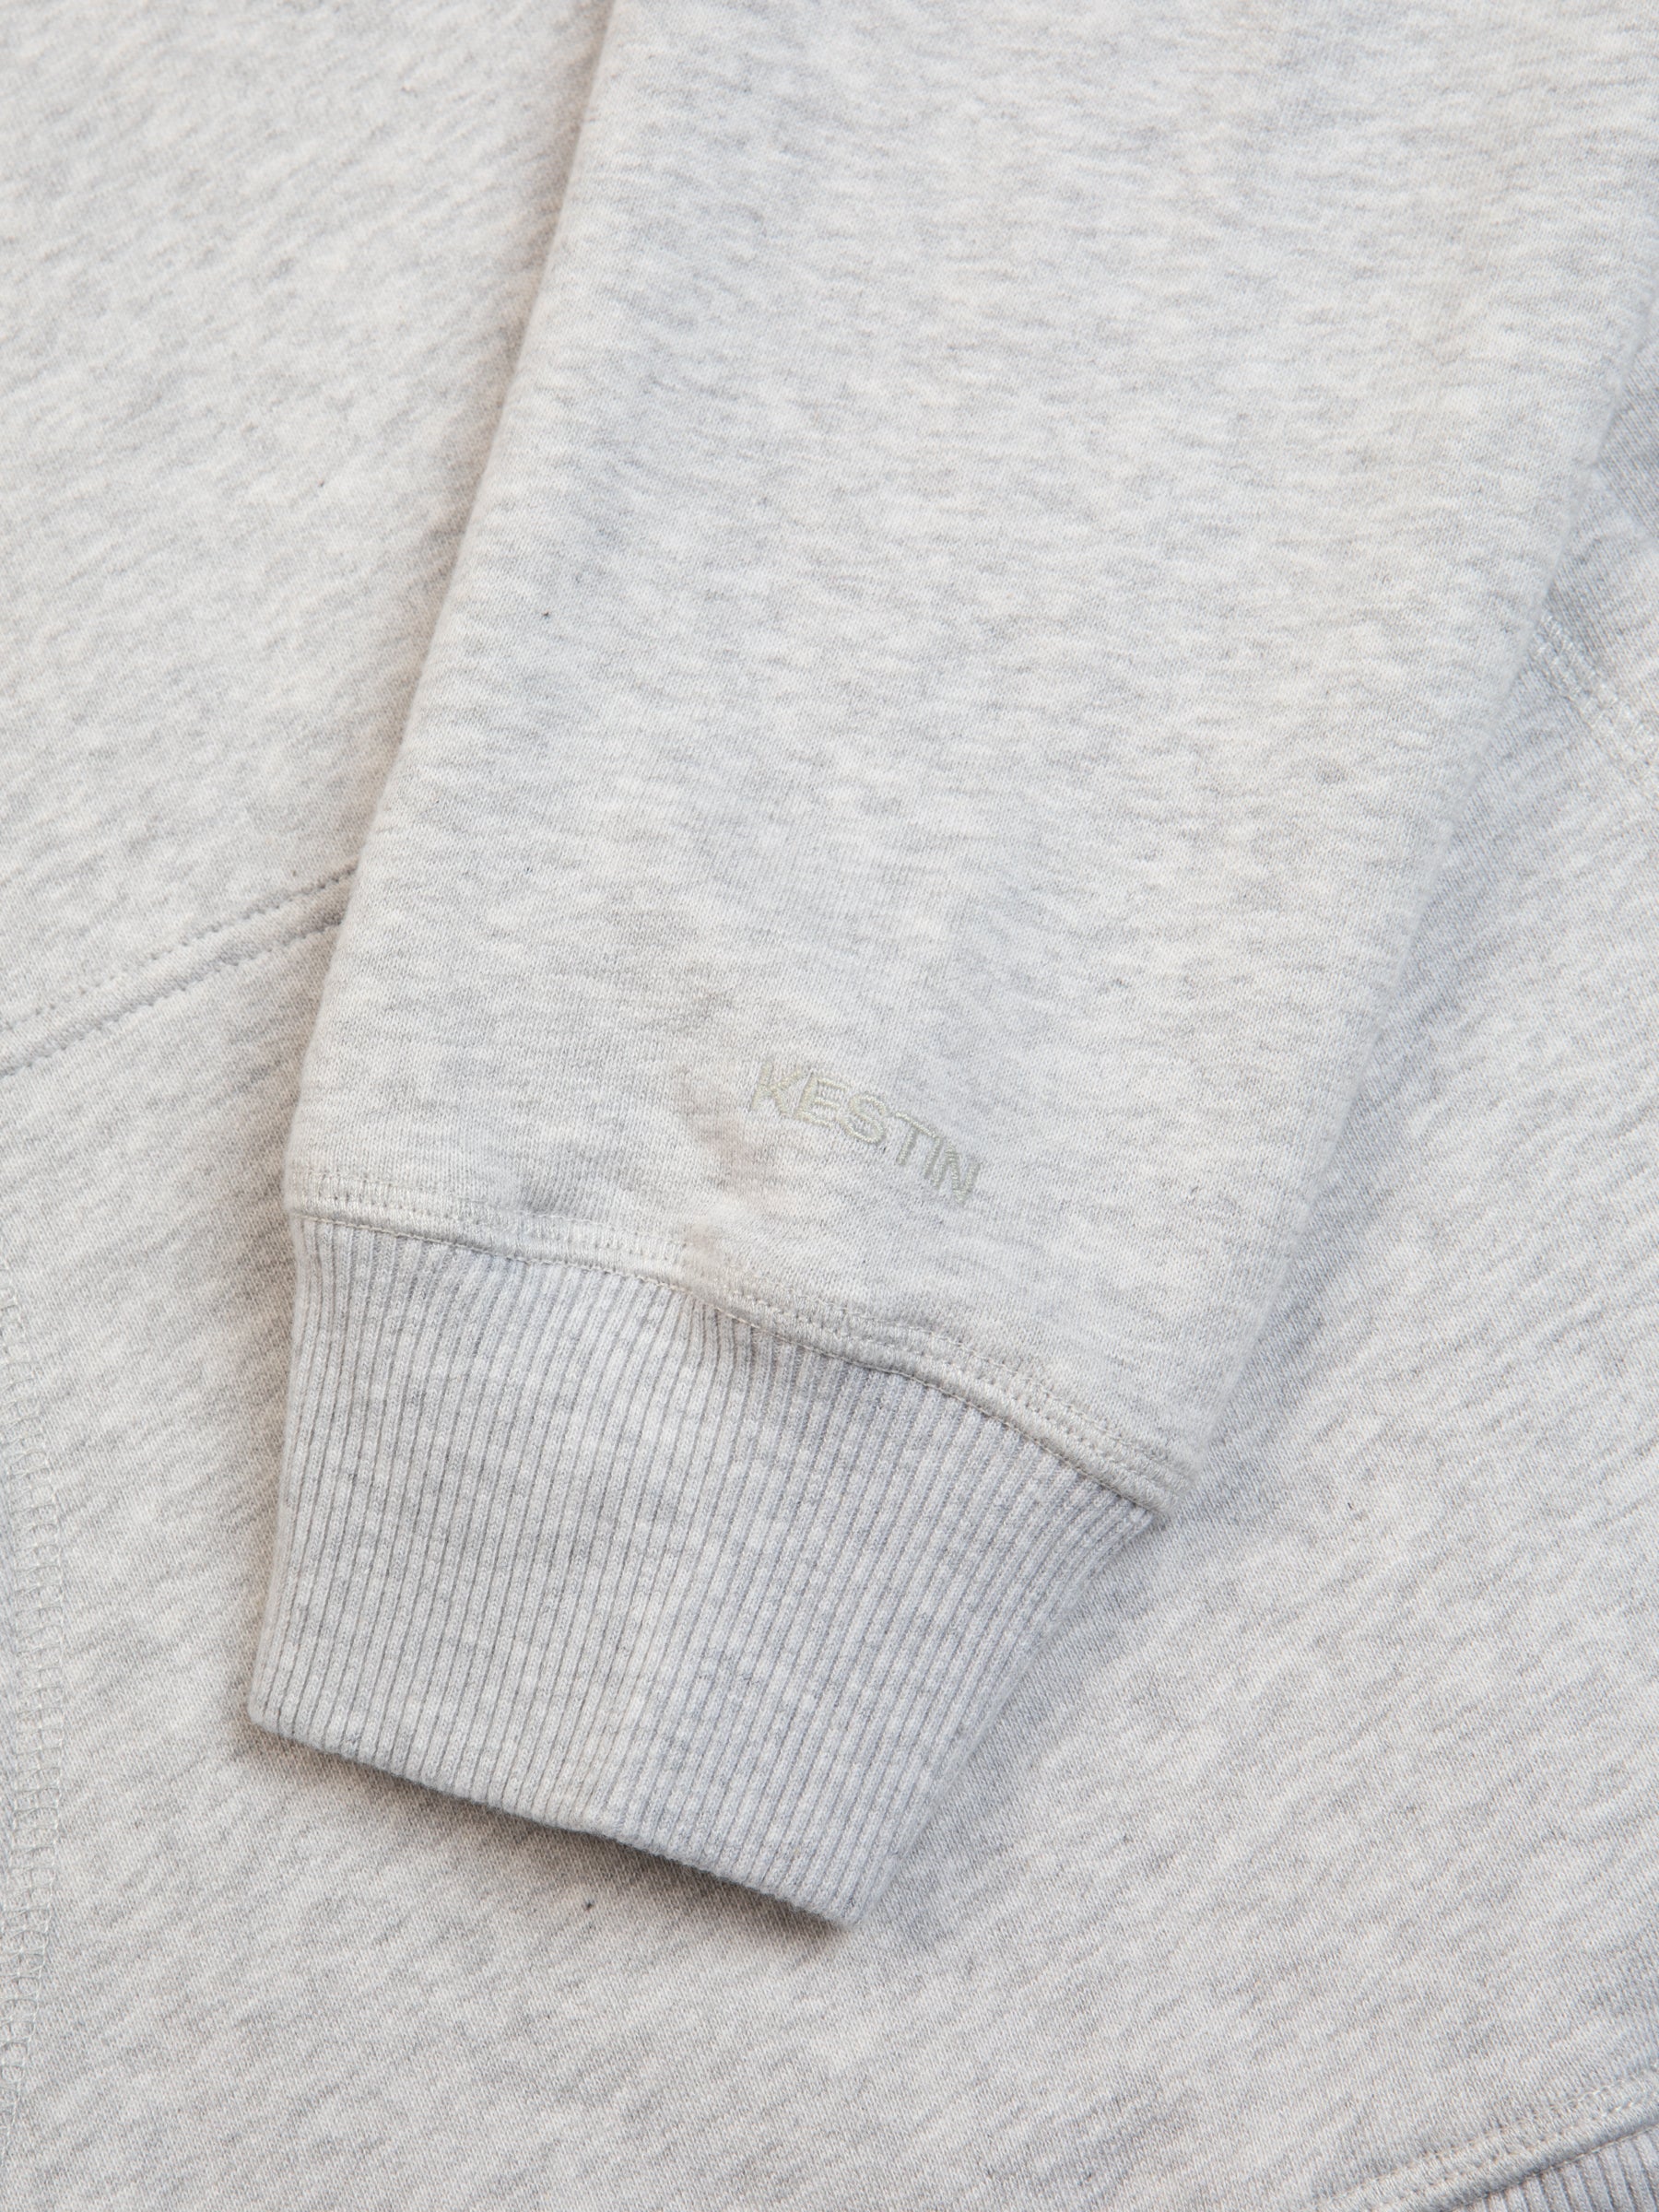 The ribbed cuff and subtle tonal logo of the St Andrews Hoodie in Grey Marl.